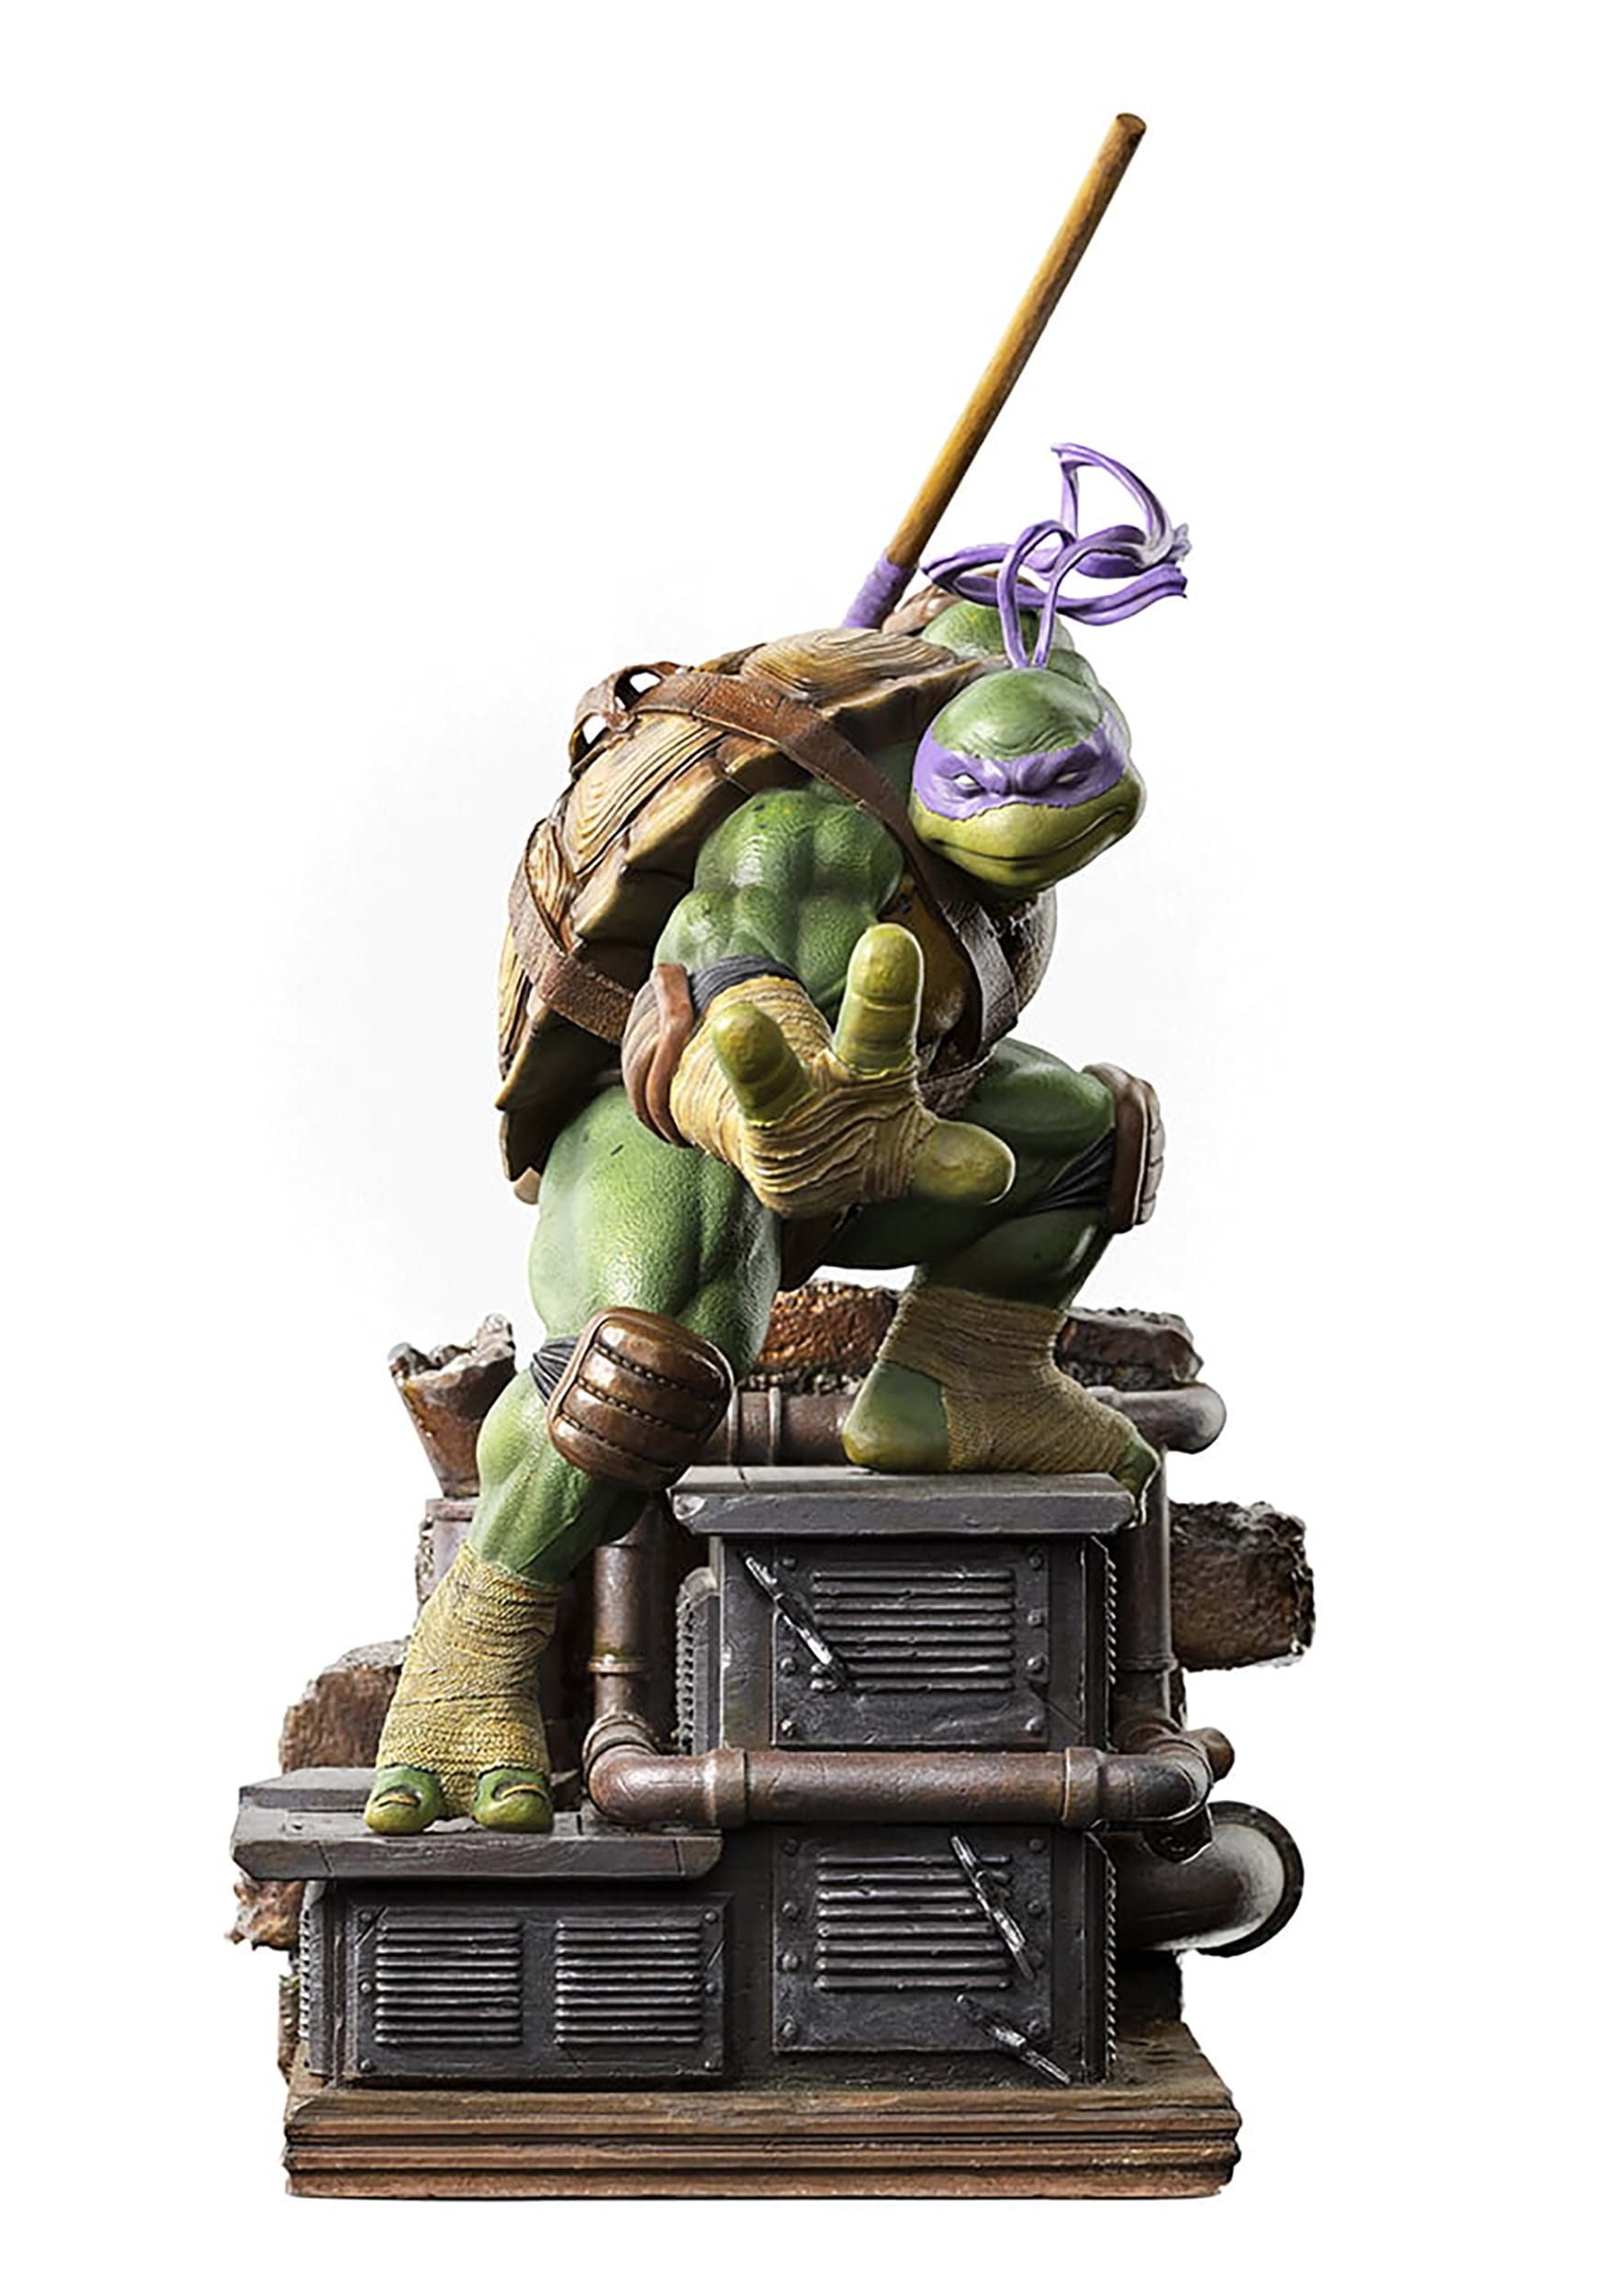 https://images.fun.com/products/84451/1-1/tmnt-donatello-1-10-bds-art-scale-statue.jpg